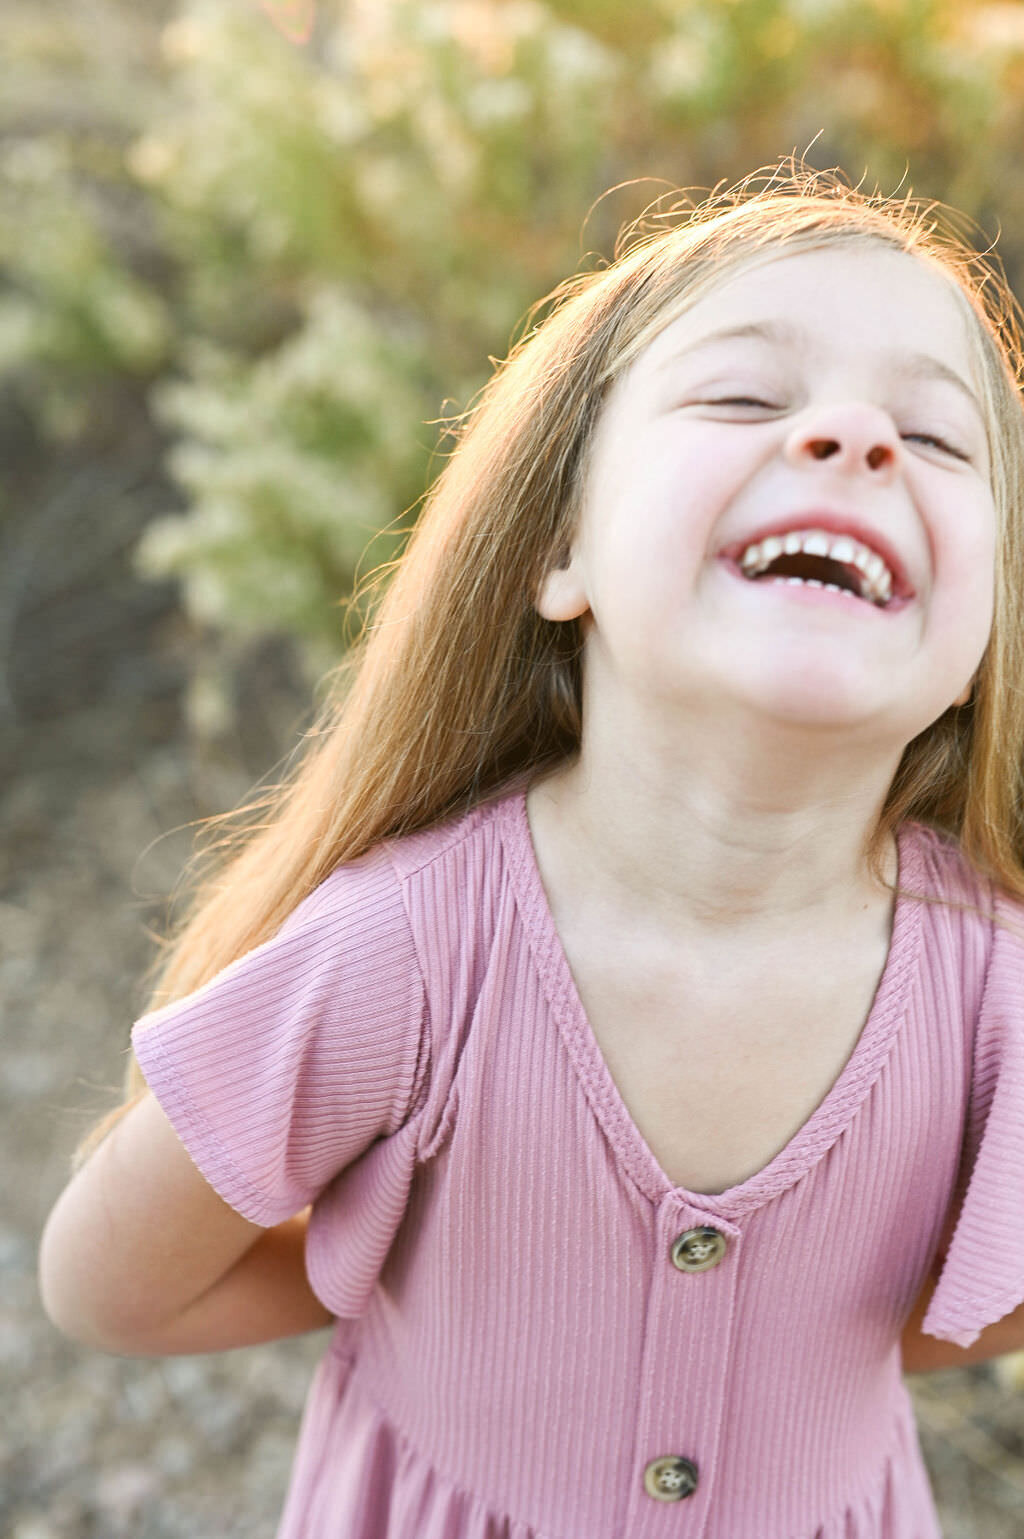 A child laughing while outside.